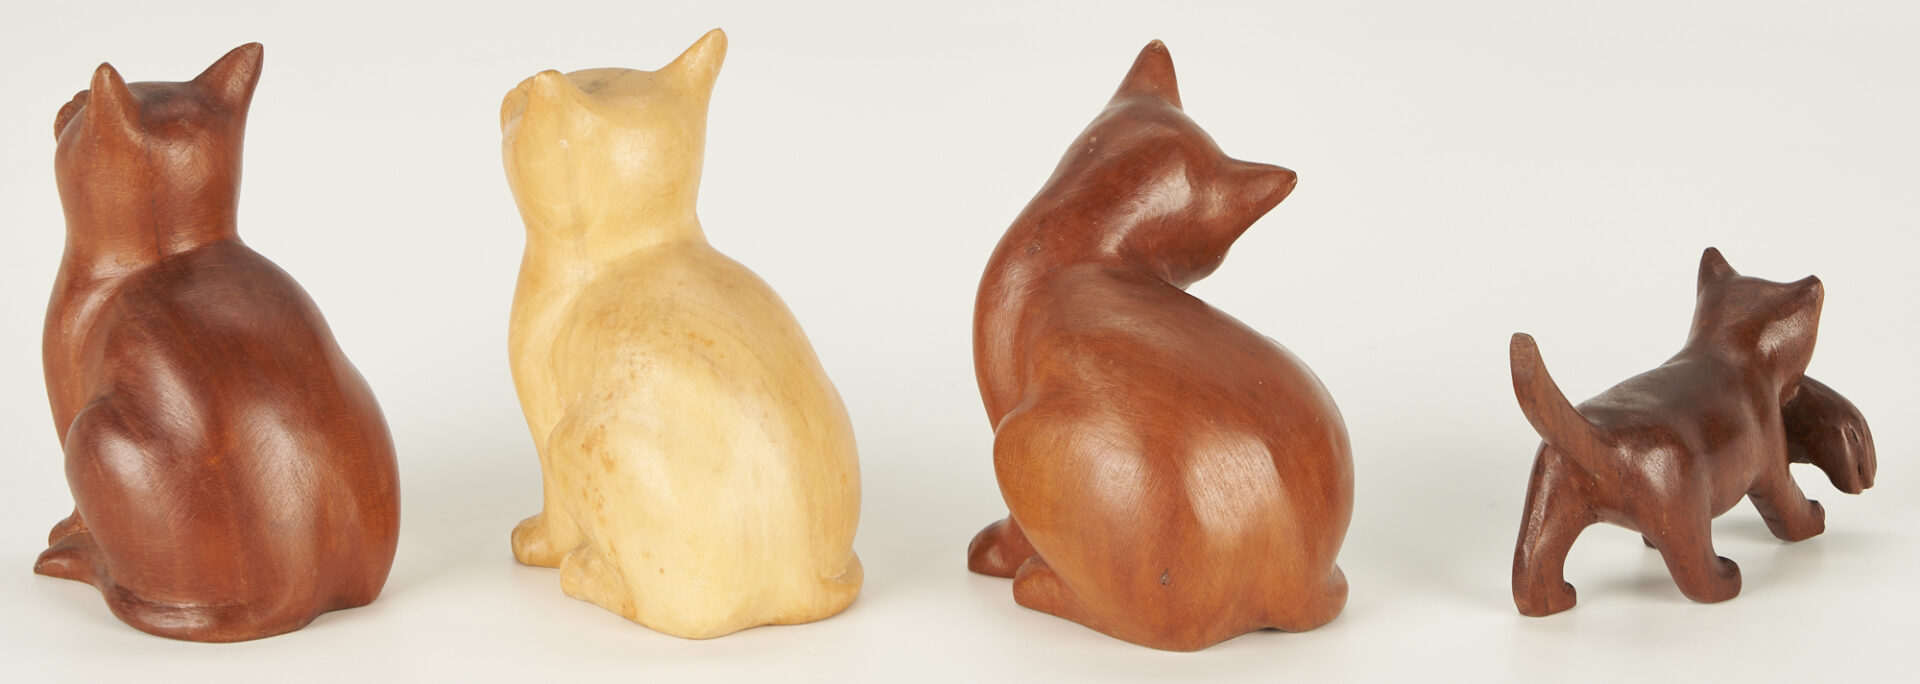 Lot 301: 8 Brasstown NC Wood Carvings of Cats by Hope Brown + Book